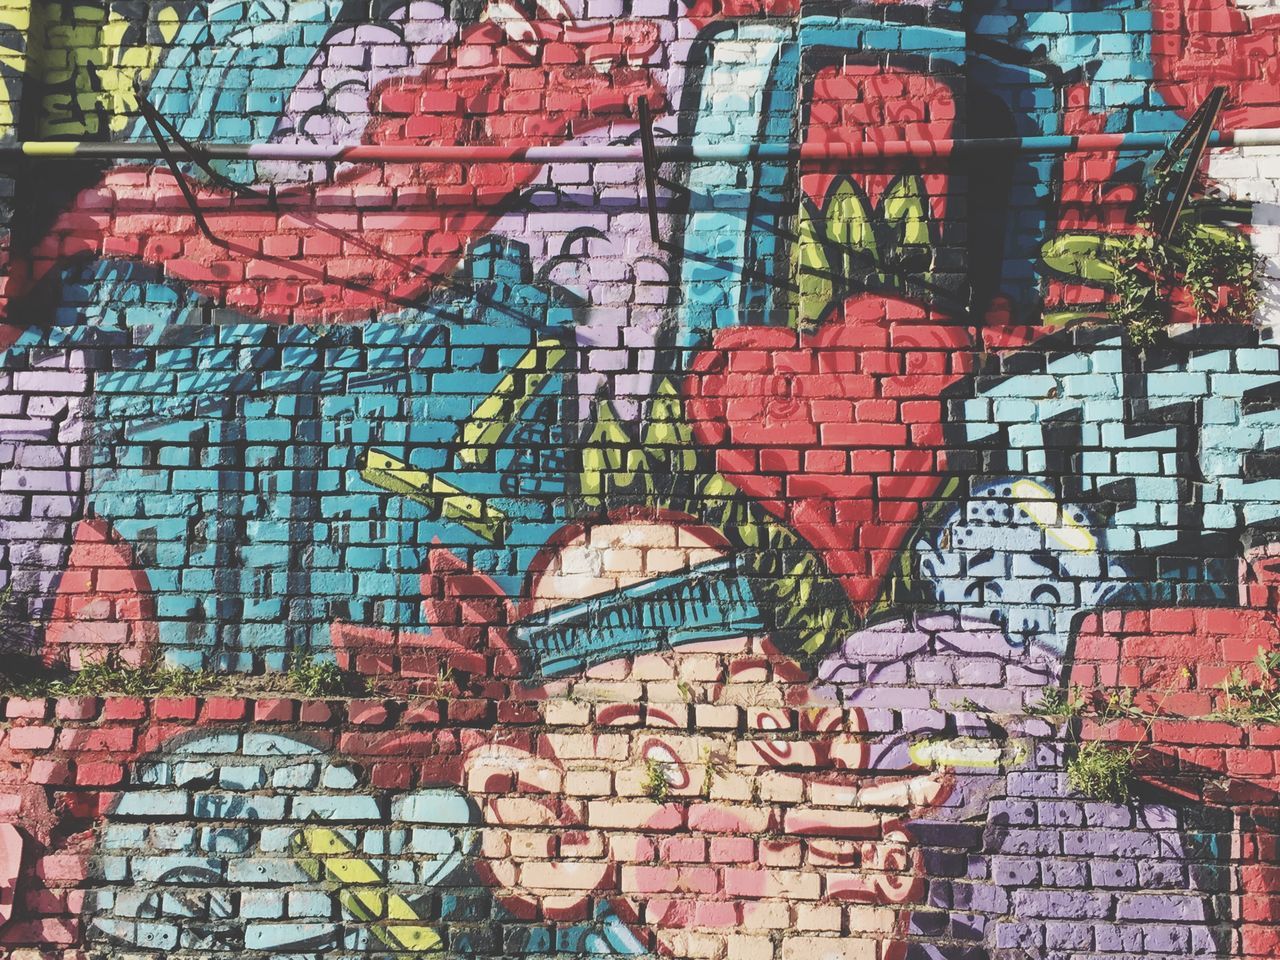 built structure, architecture, building exterior, wall - building feature, brick wall, graffiti, art, art and craft, creativity, multi colored, full frame, backgrounds, pattern, wall, design, red, day, outdoors, window, mural